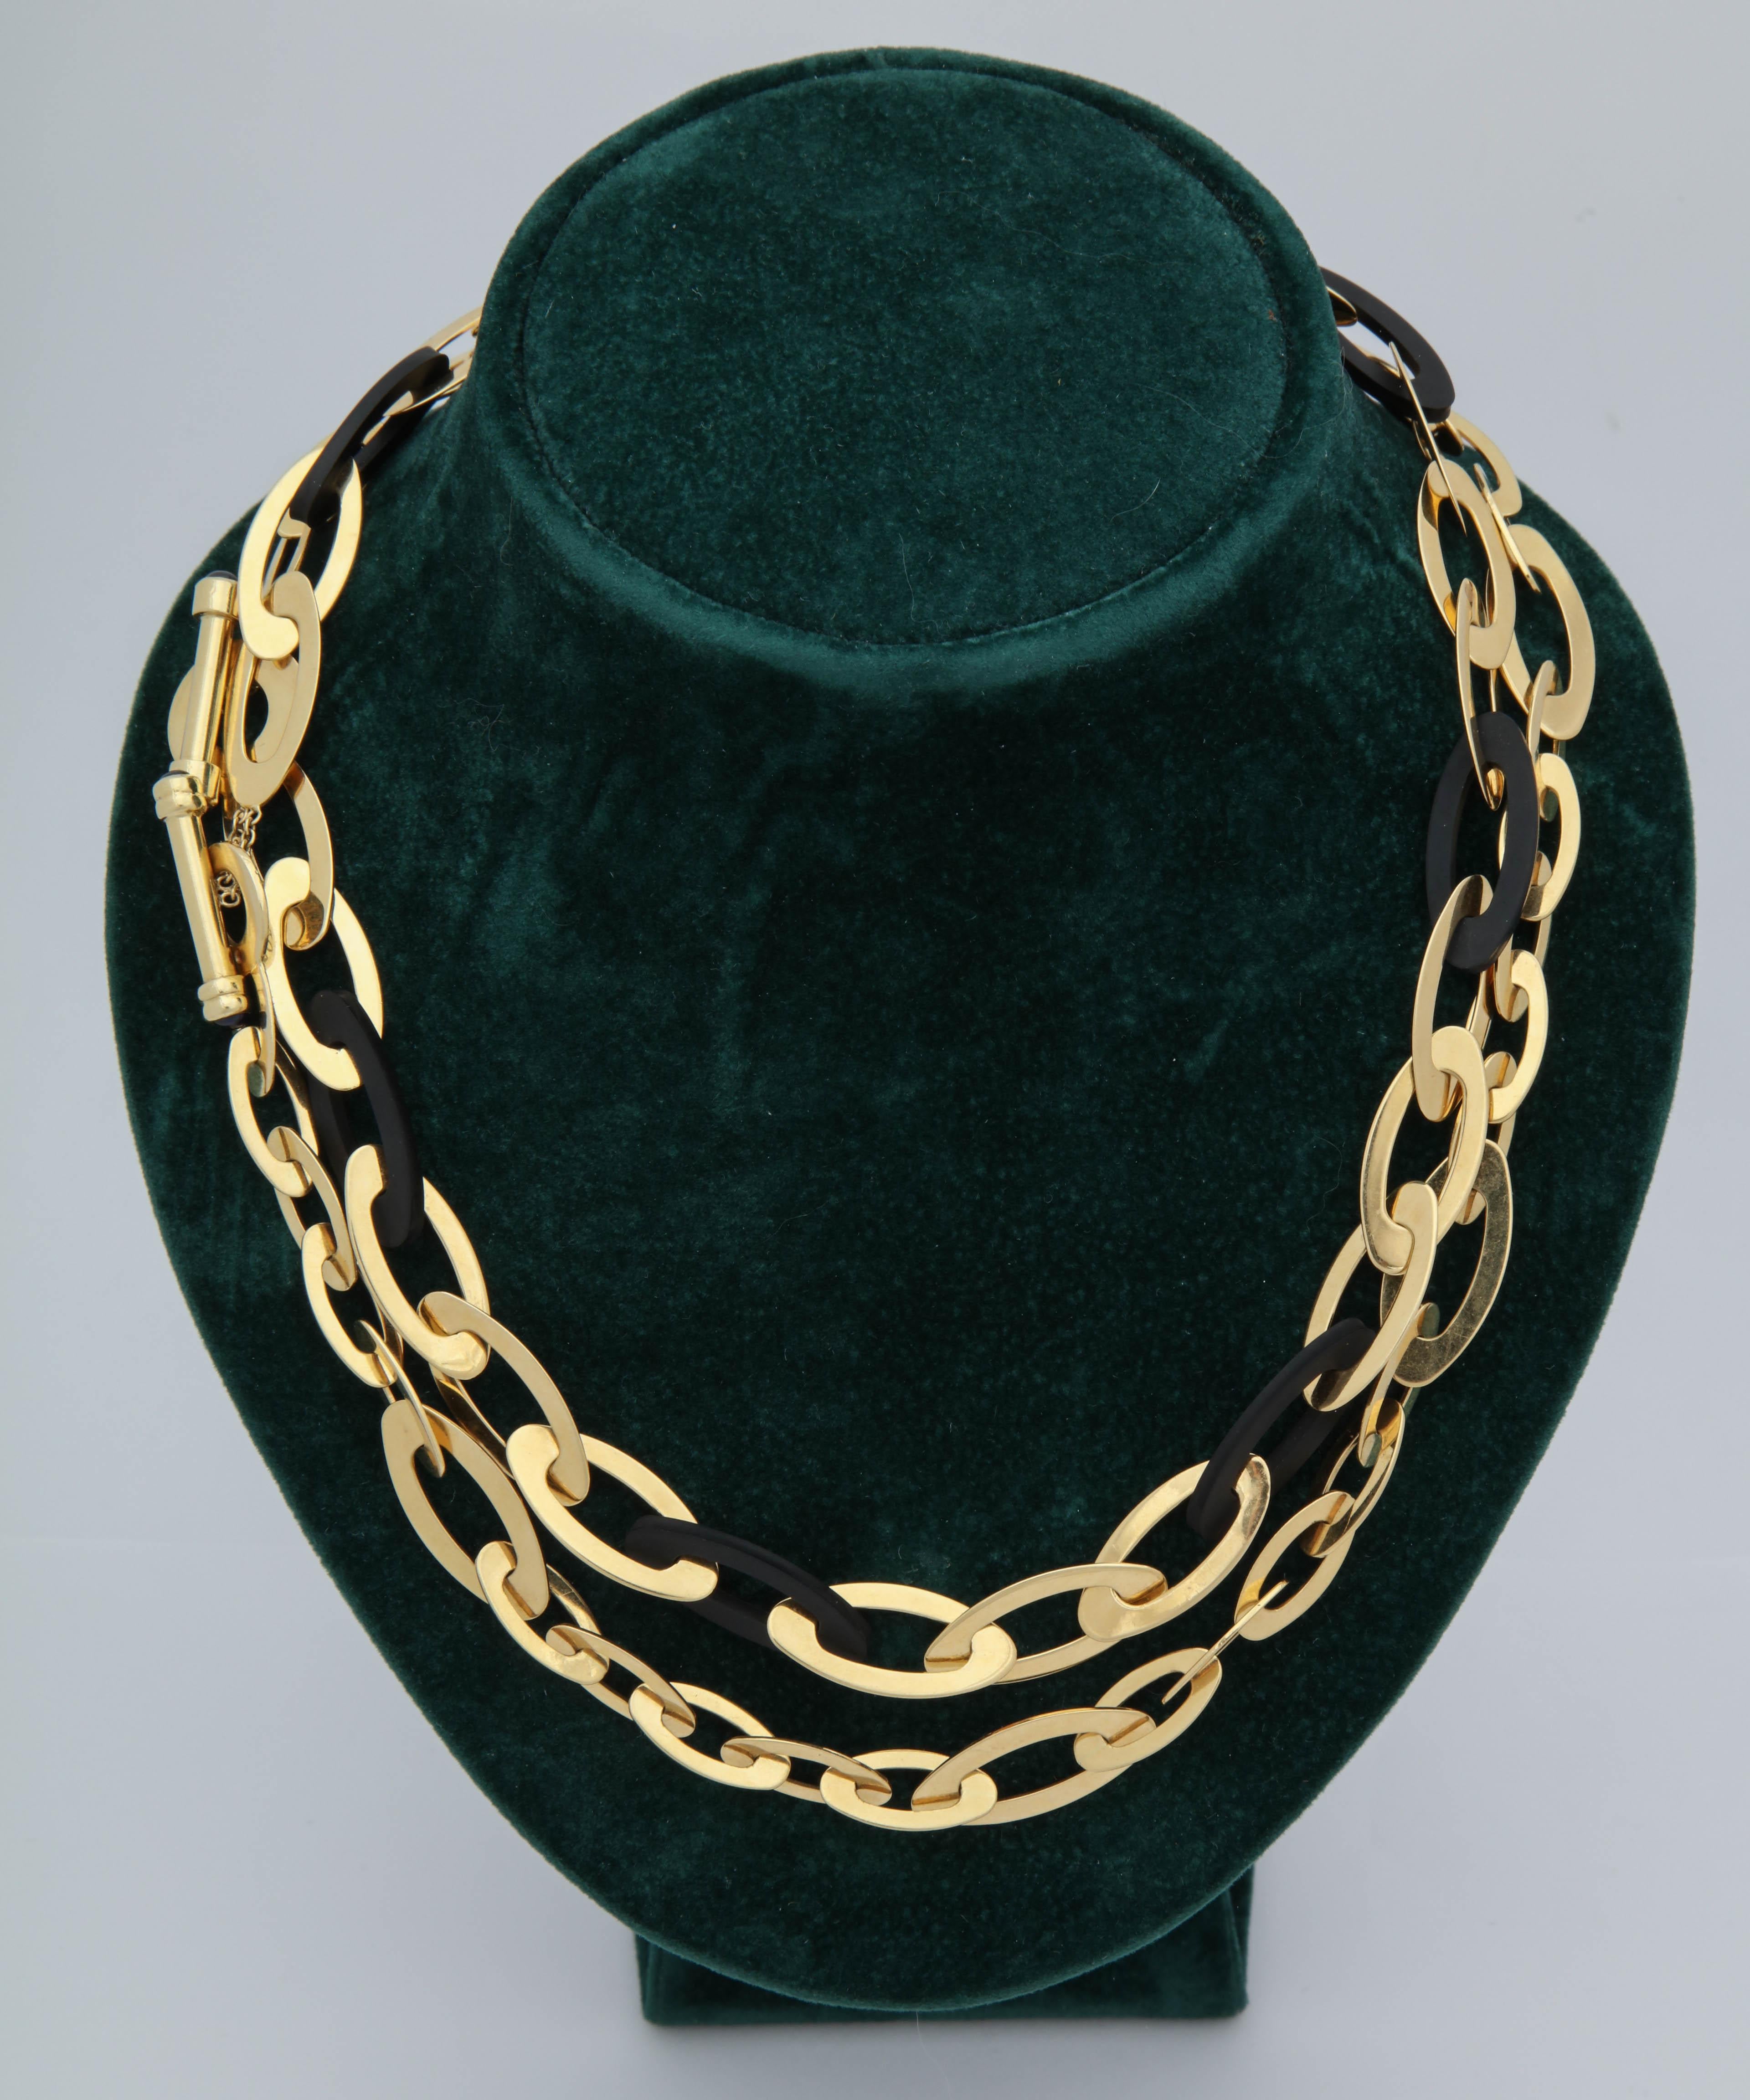 One 18kt Yellow Gold Chain Link Necklace Composed Of High Quality Double Reinforced Oblong Jewelers Rubber Pieces And Further Designed With Numerous 18kt Yellow Gold Oblong Shaped Links. This Long Chain May Be Converted To Be Worn As Two Separate